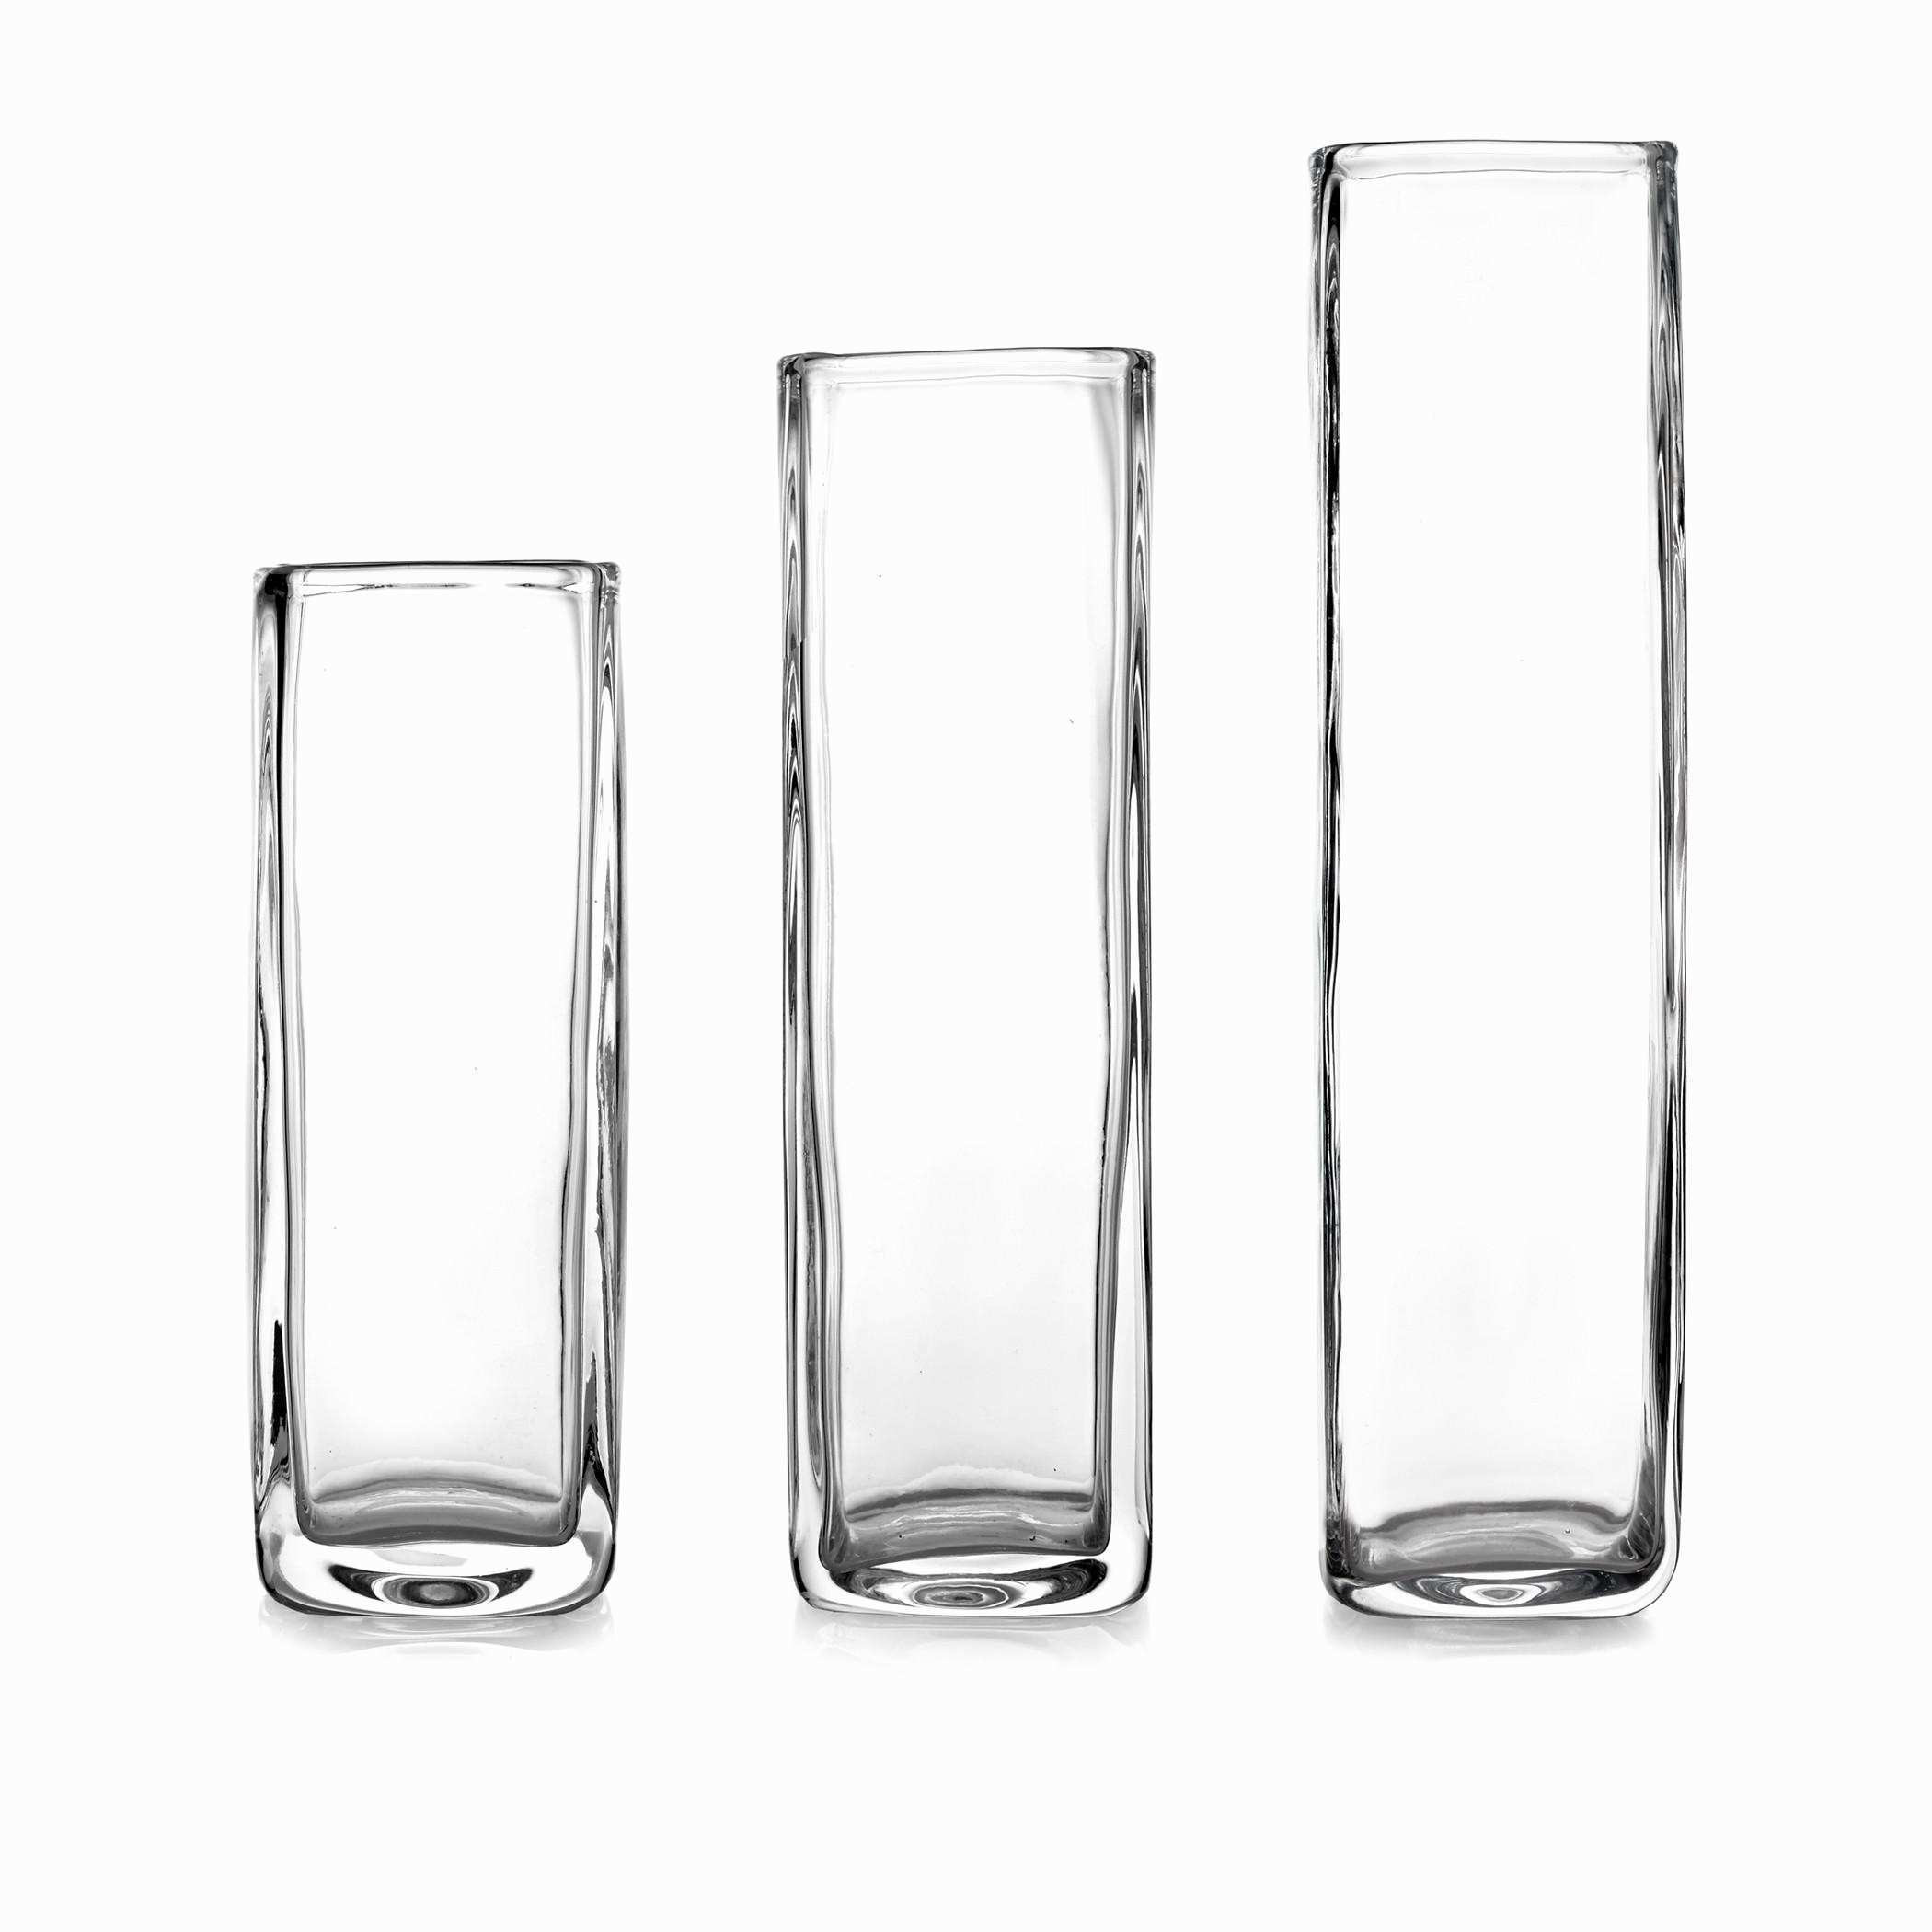 22 Fantastic Footed Glass Hurricane Vase 2024 free download footed glass hurricane vase of tall black vases collection d vine dev 10 pure white ceramic flower in tall black vases gallery glass wedding centerpieces inspirational living room tall glass